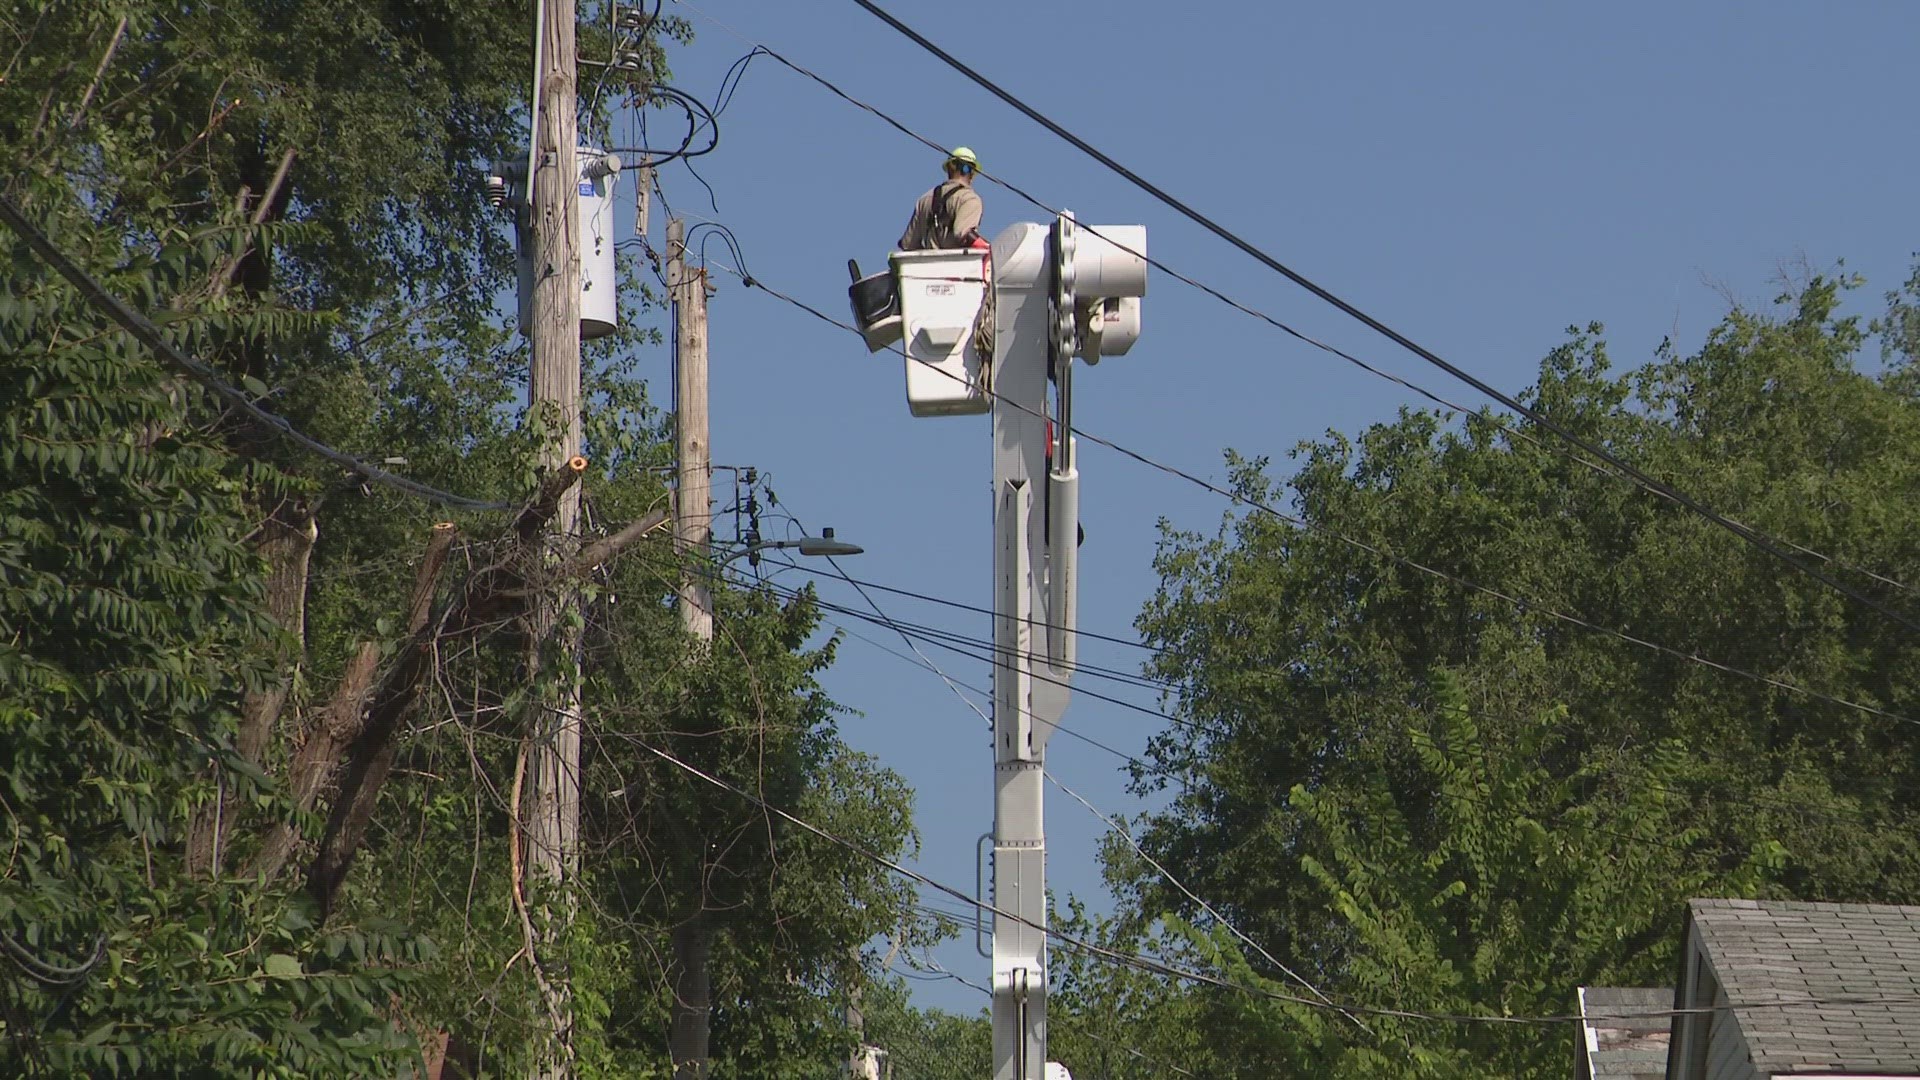 Thousands in both states have been without power for days. Ameren Missouri officials said they're anticipating power to be fully restored by Wednesday night.